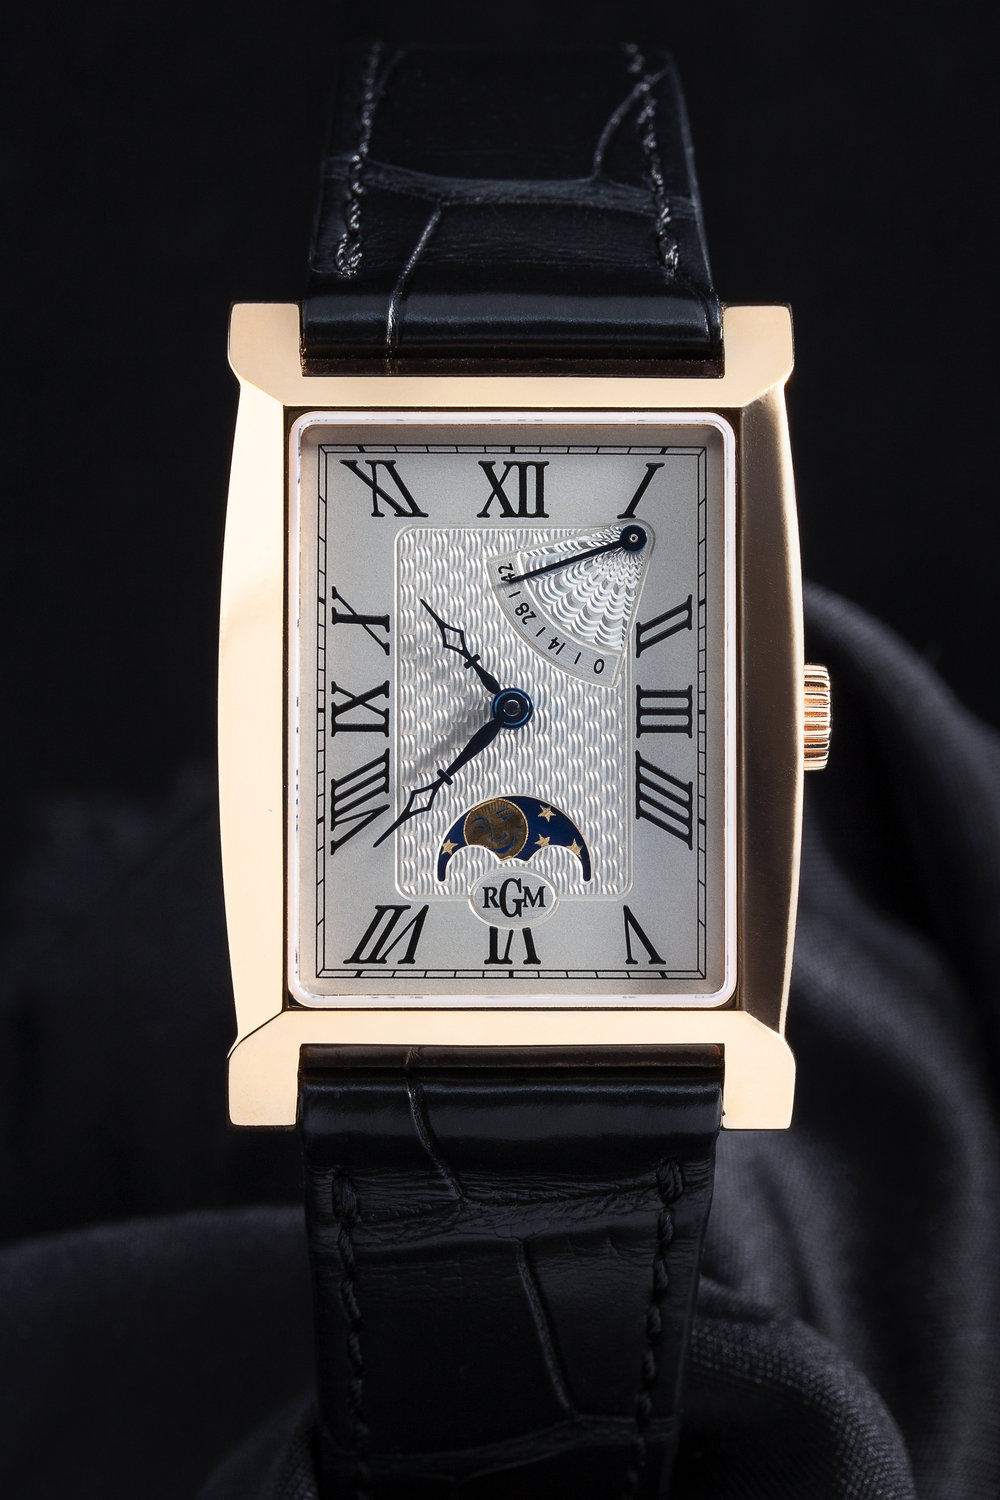 Replication A Lange Sohne Watches